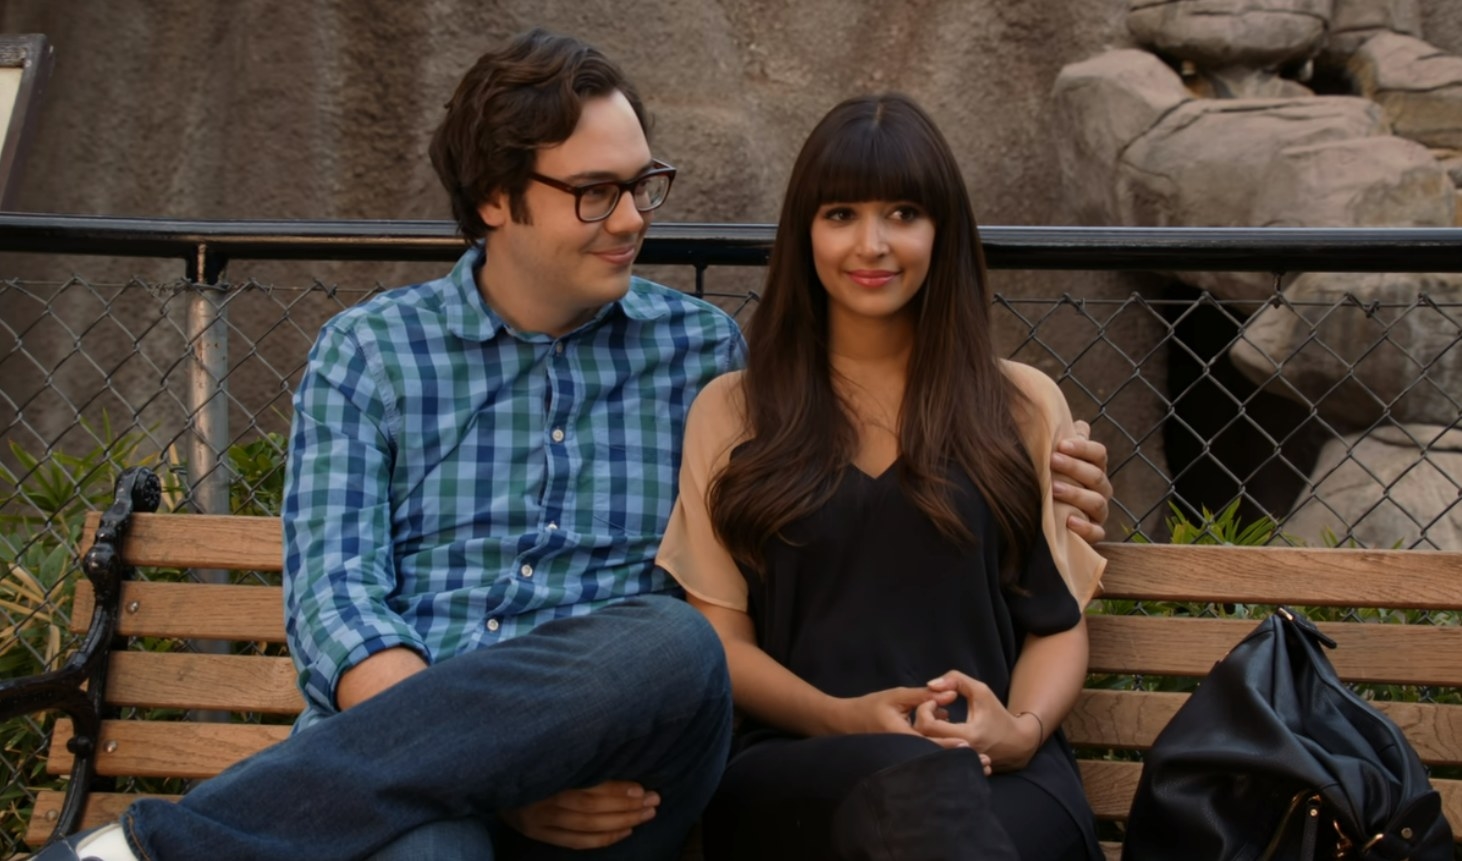 Robby puts an arm around Cece as they sit on a park bench